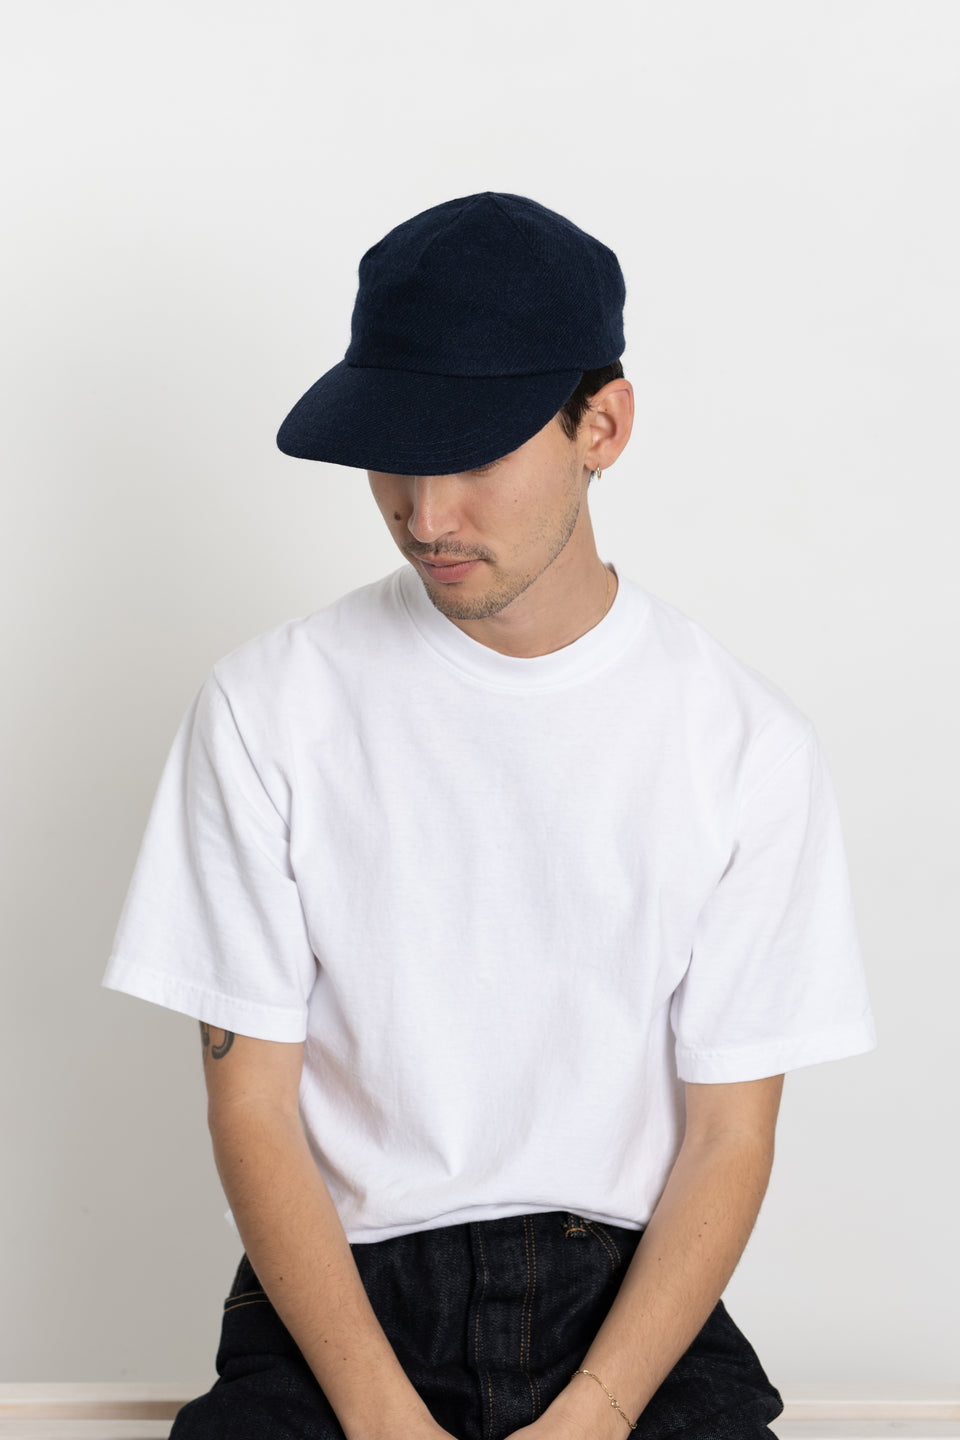 Found Feather Made in Japan Men's Collection FW23 1 Panel Cap Mélange Wool Navy Calculus Victoria BC Canada